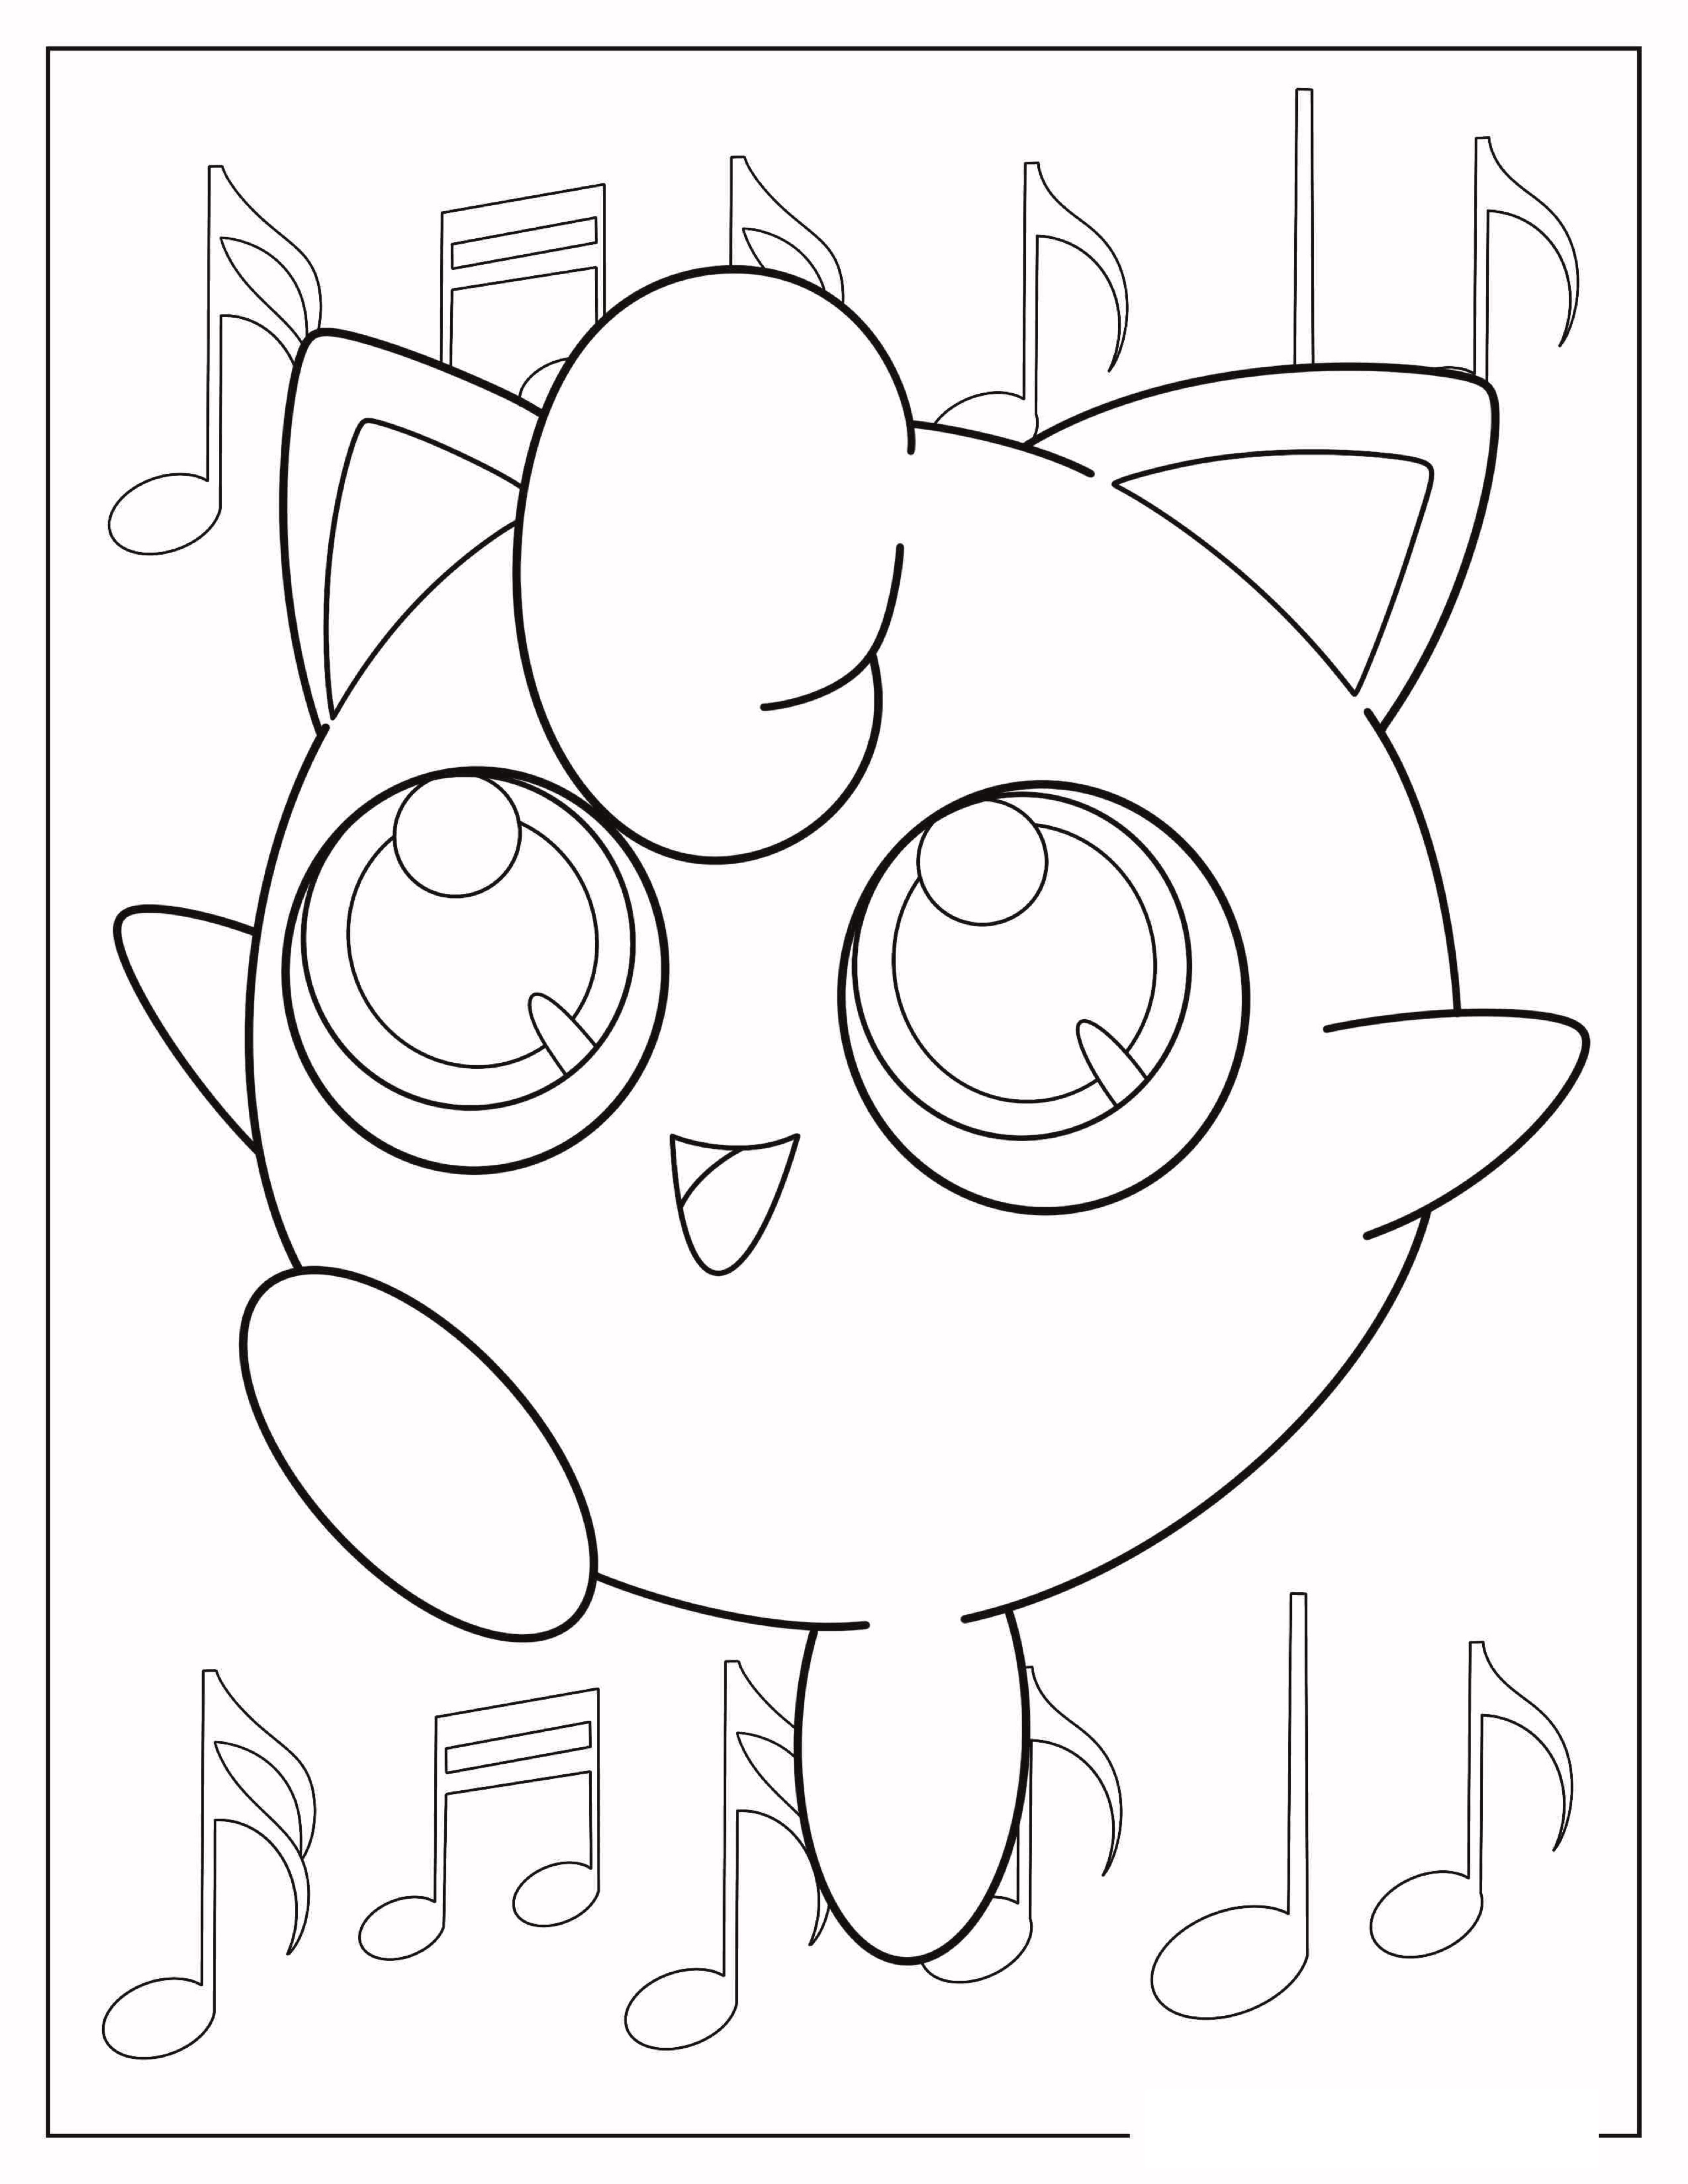 Jigglypuff-With-Music-Notes-To-Color.jpg